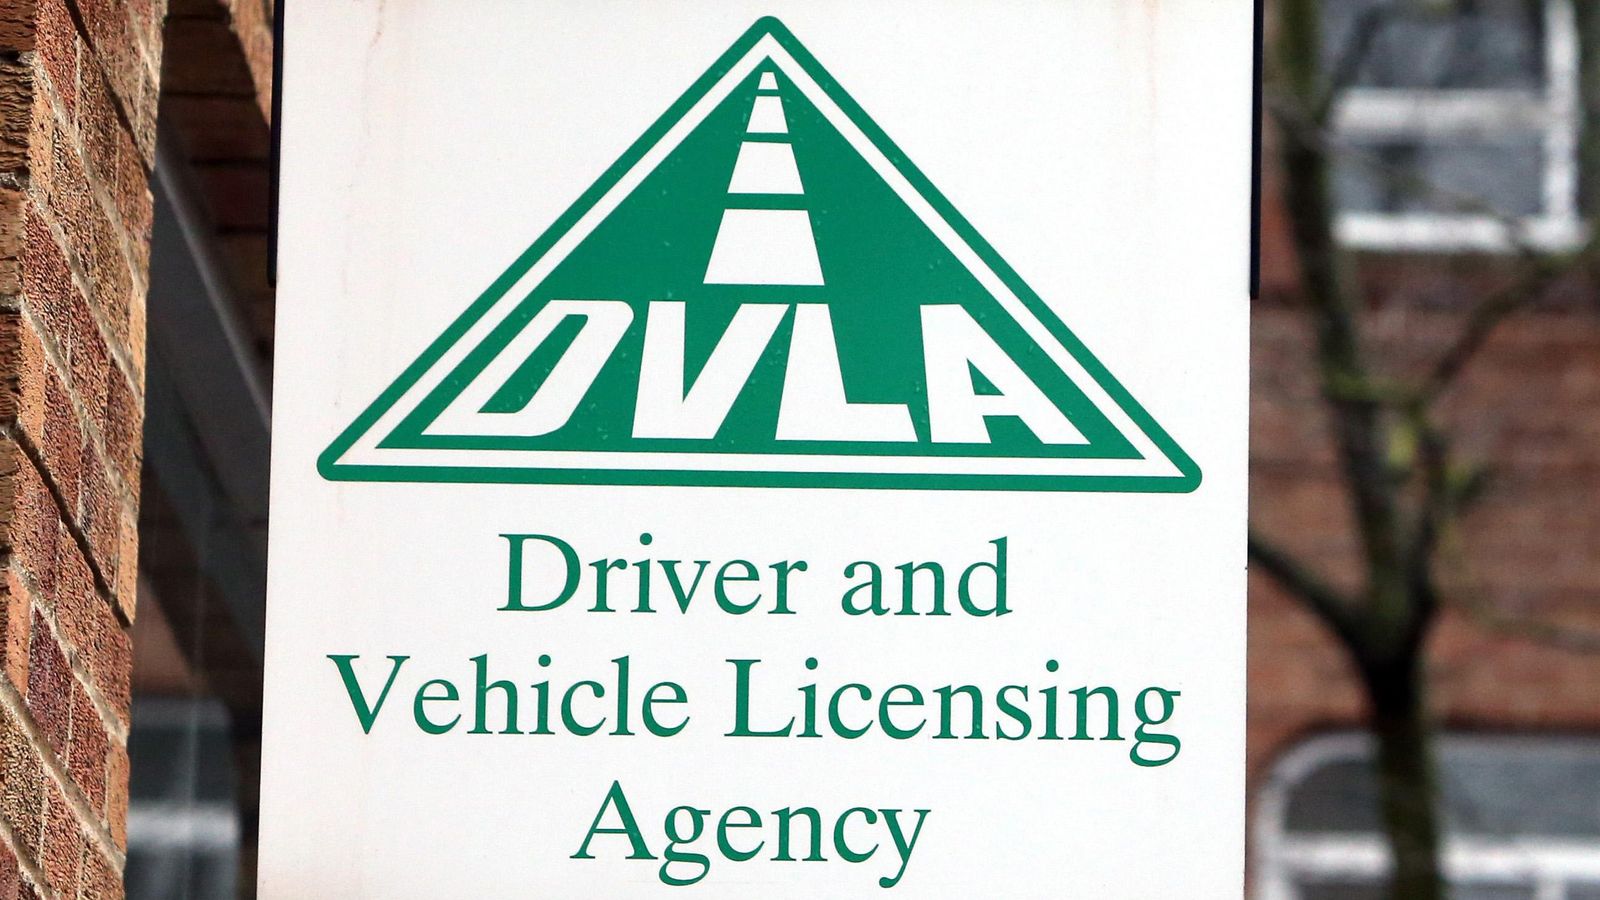 'Delays to driving licences' as DVLA workers announce 15 days of strikes